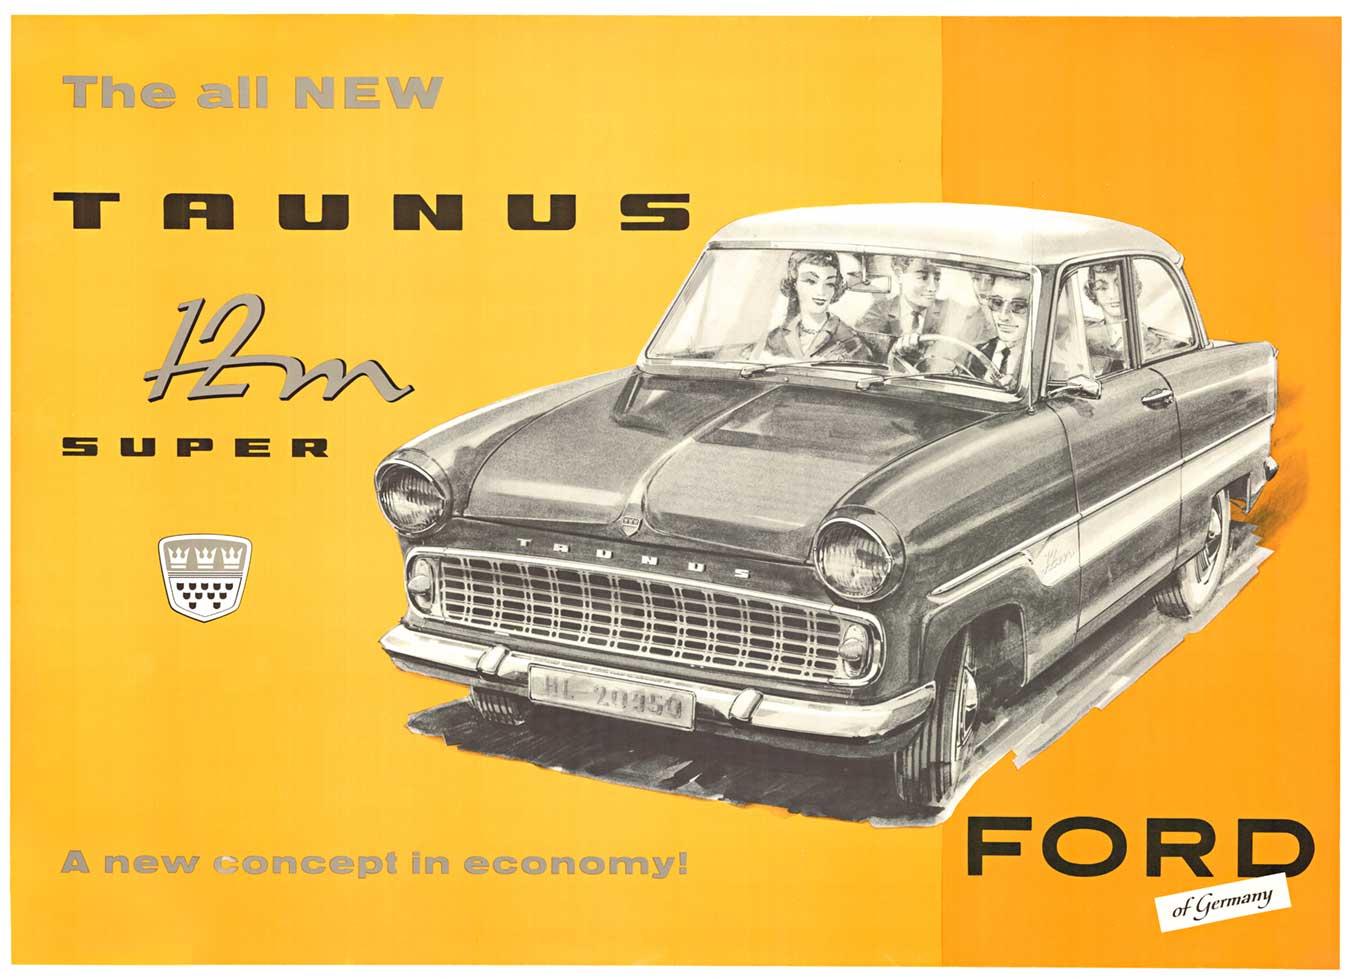 Unknown Figurative Print - Original Ford, The all New Taunus 12M Super vintage German poster